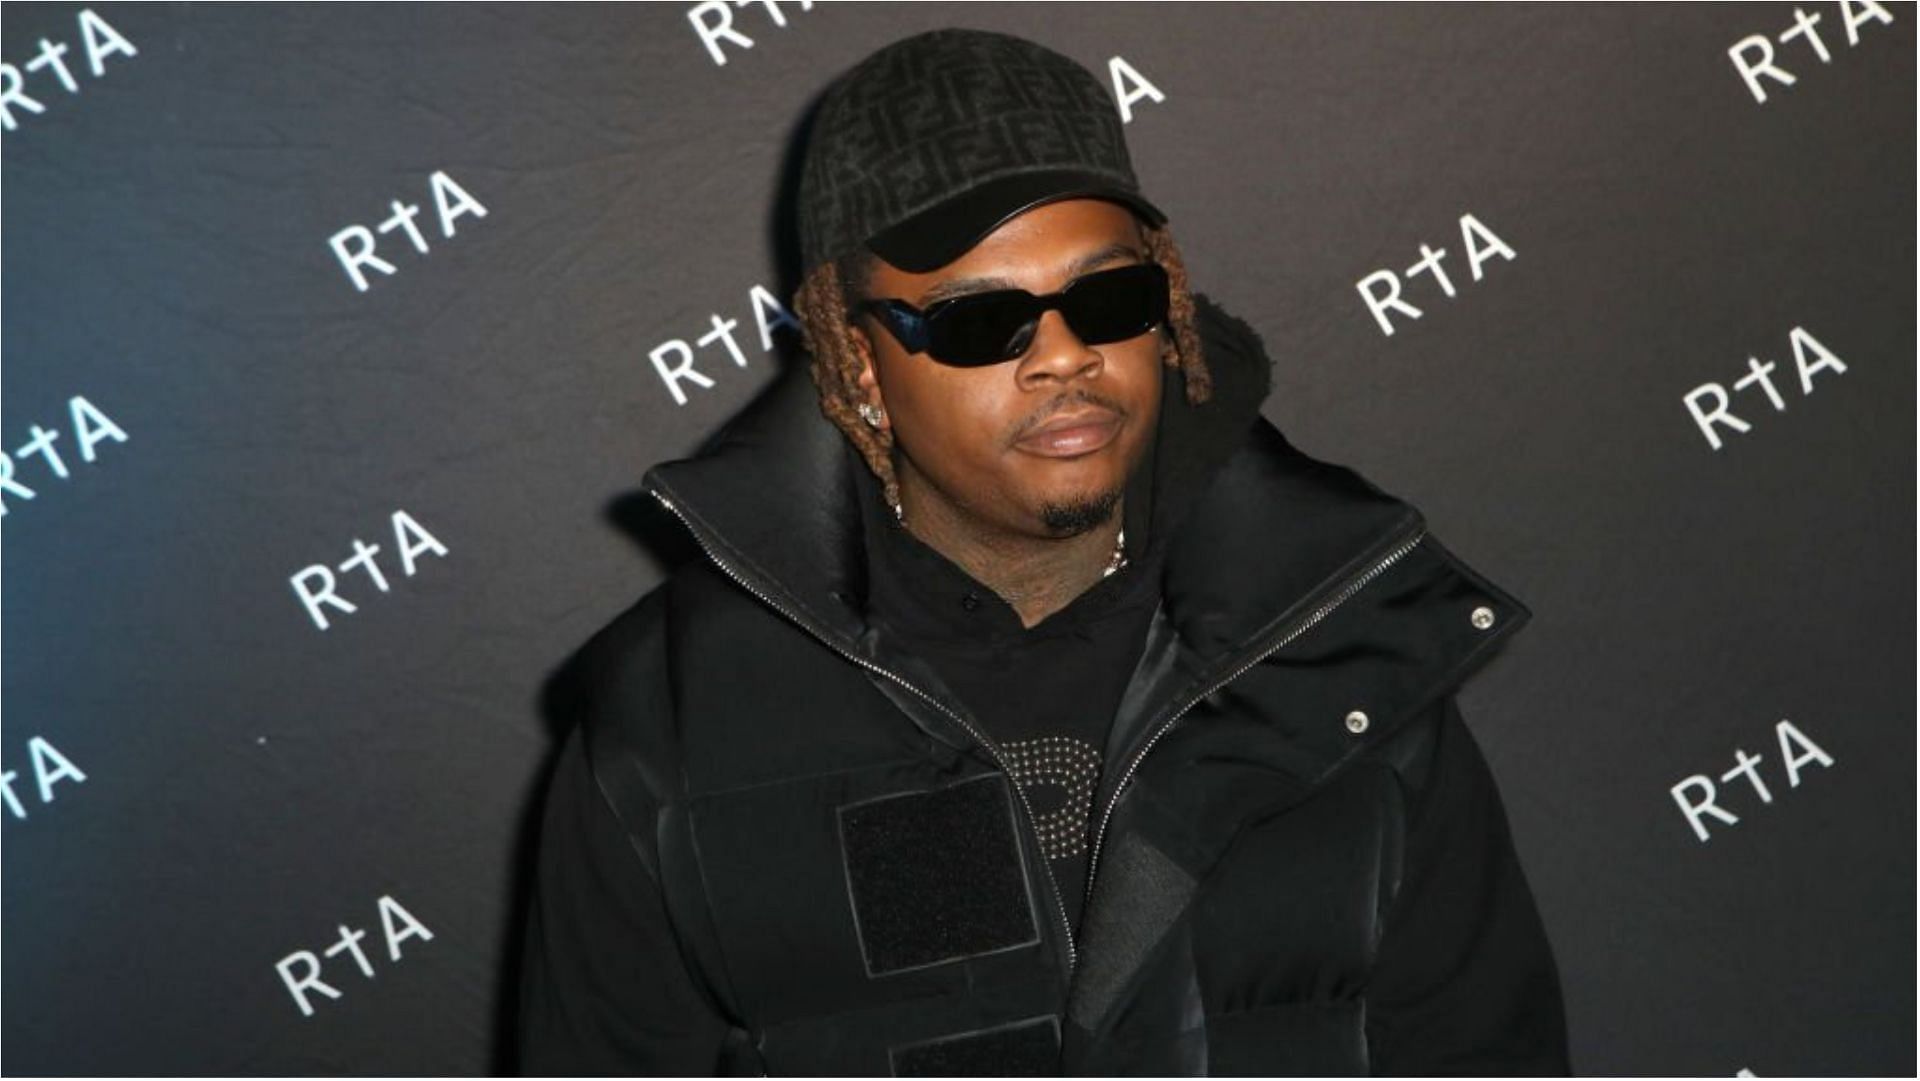 Gunna was arrested on violation of RICO (Image via Ari Perilstein/Getty Images)